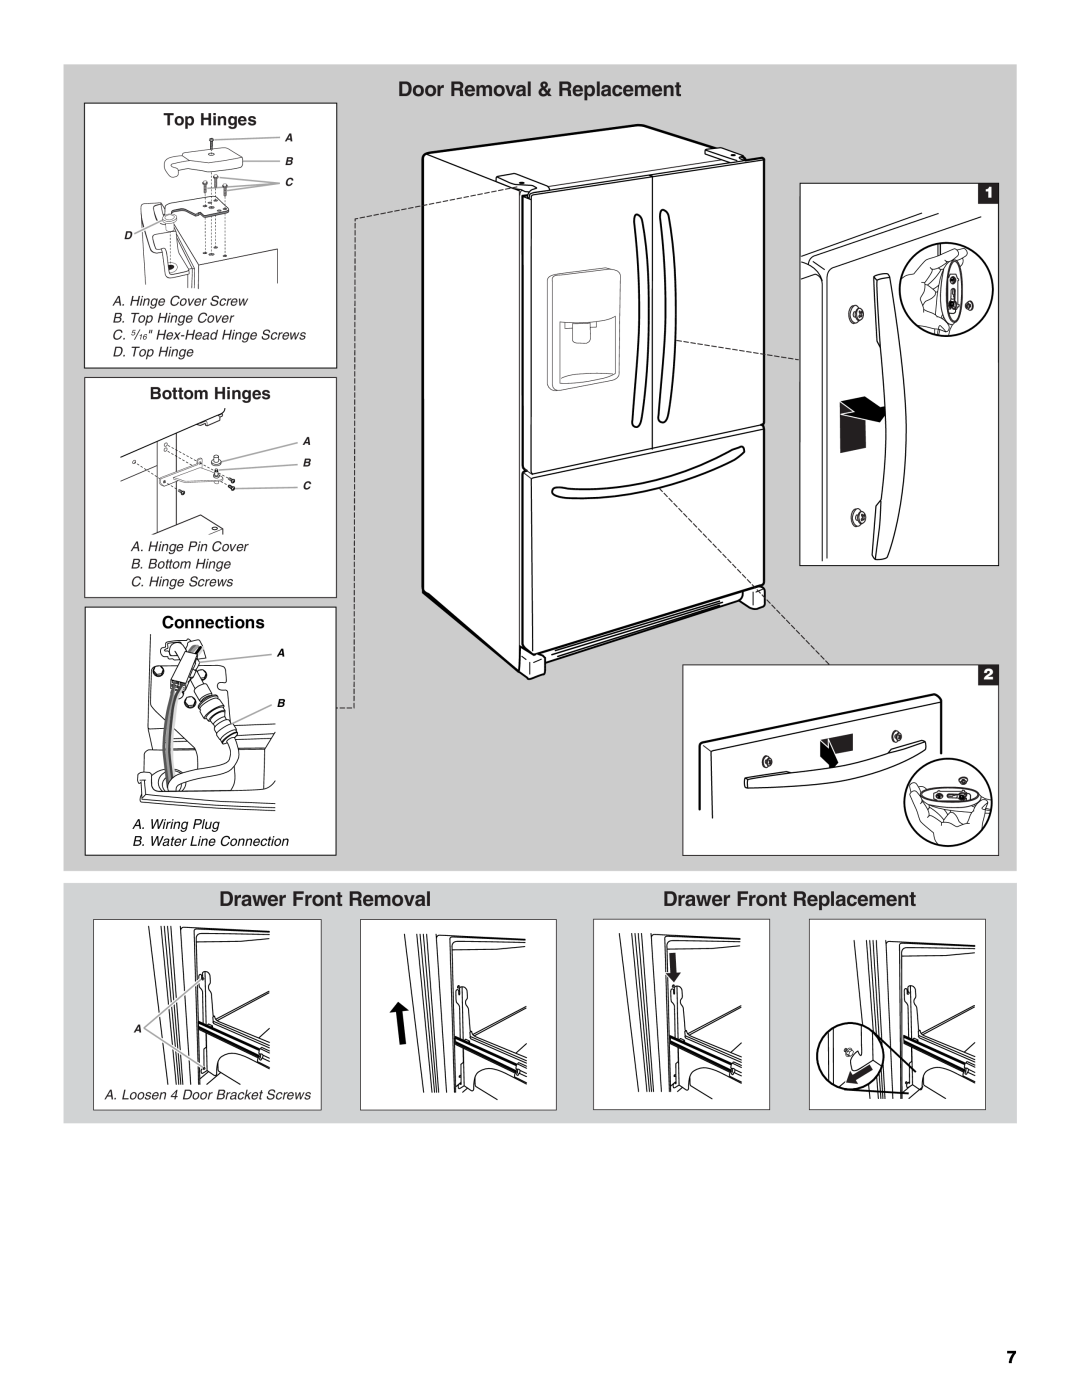 Whirlpool W10329360A Door Removal & Replacement, Drawer Front Removal, Drawer Front Replacement, Top Hinges, Bottom Hinges 